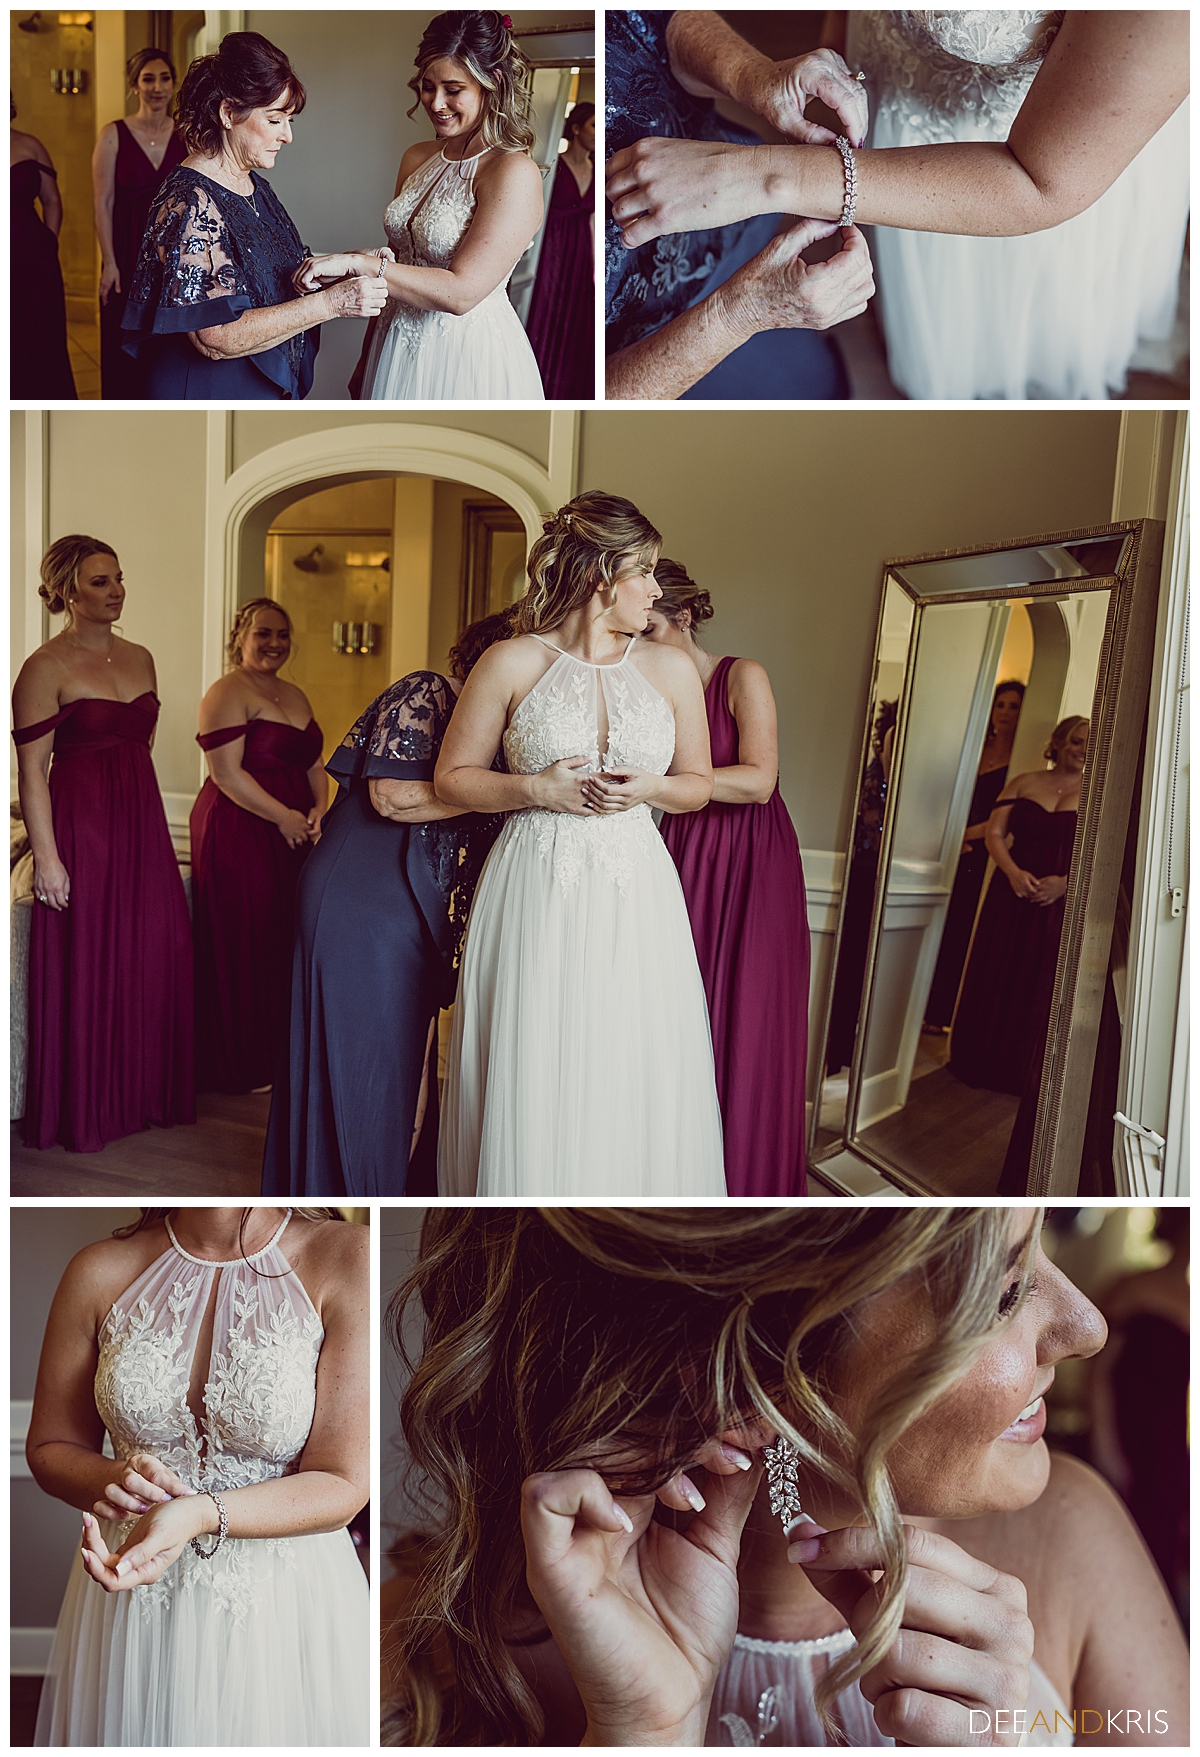 Five images of the bride getting assistance from her wedding party with her dress and jewelry 